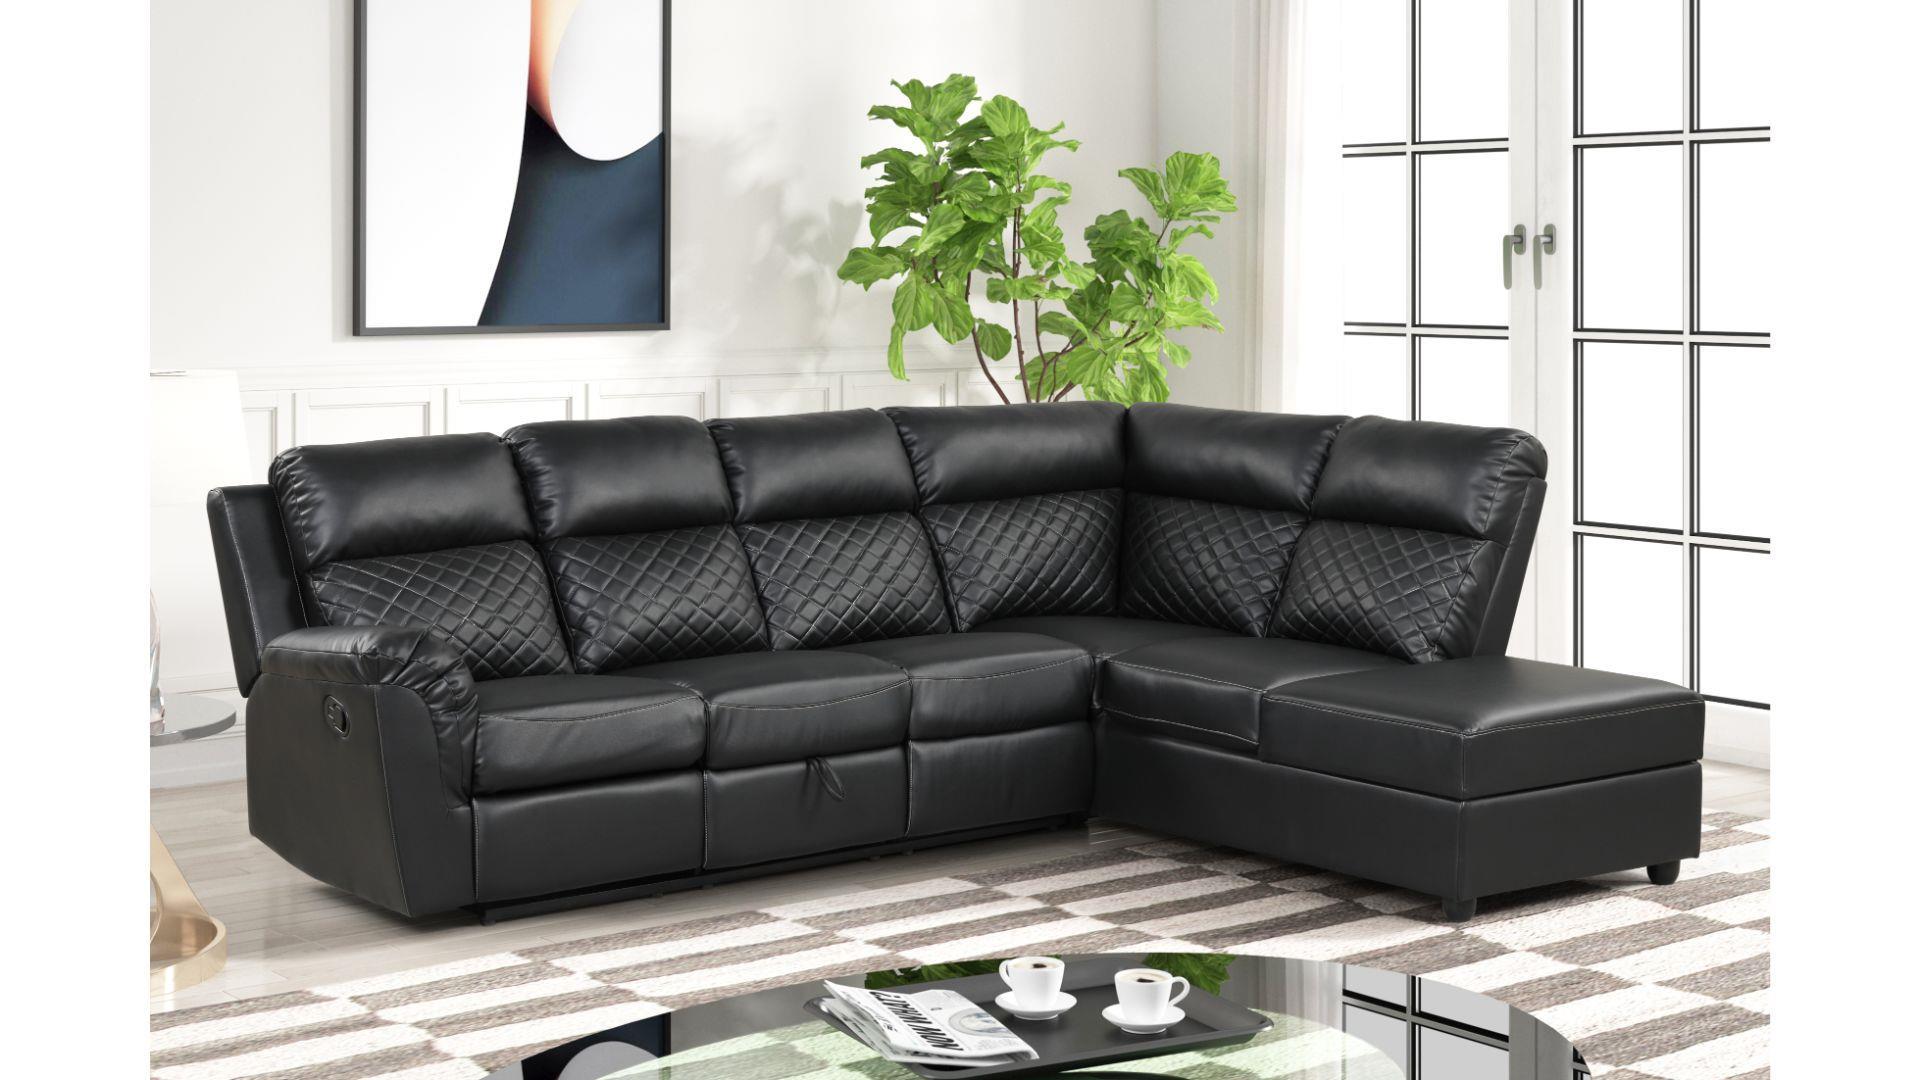 Galaxy Home Furniture CHARLOTTE-BK Recliner Sectional